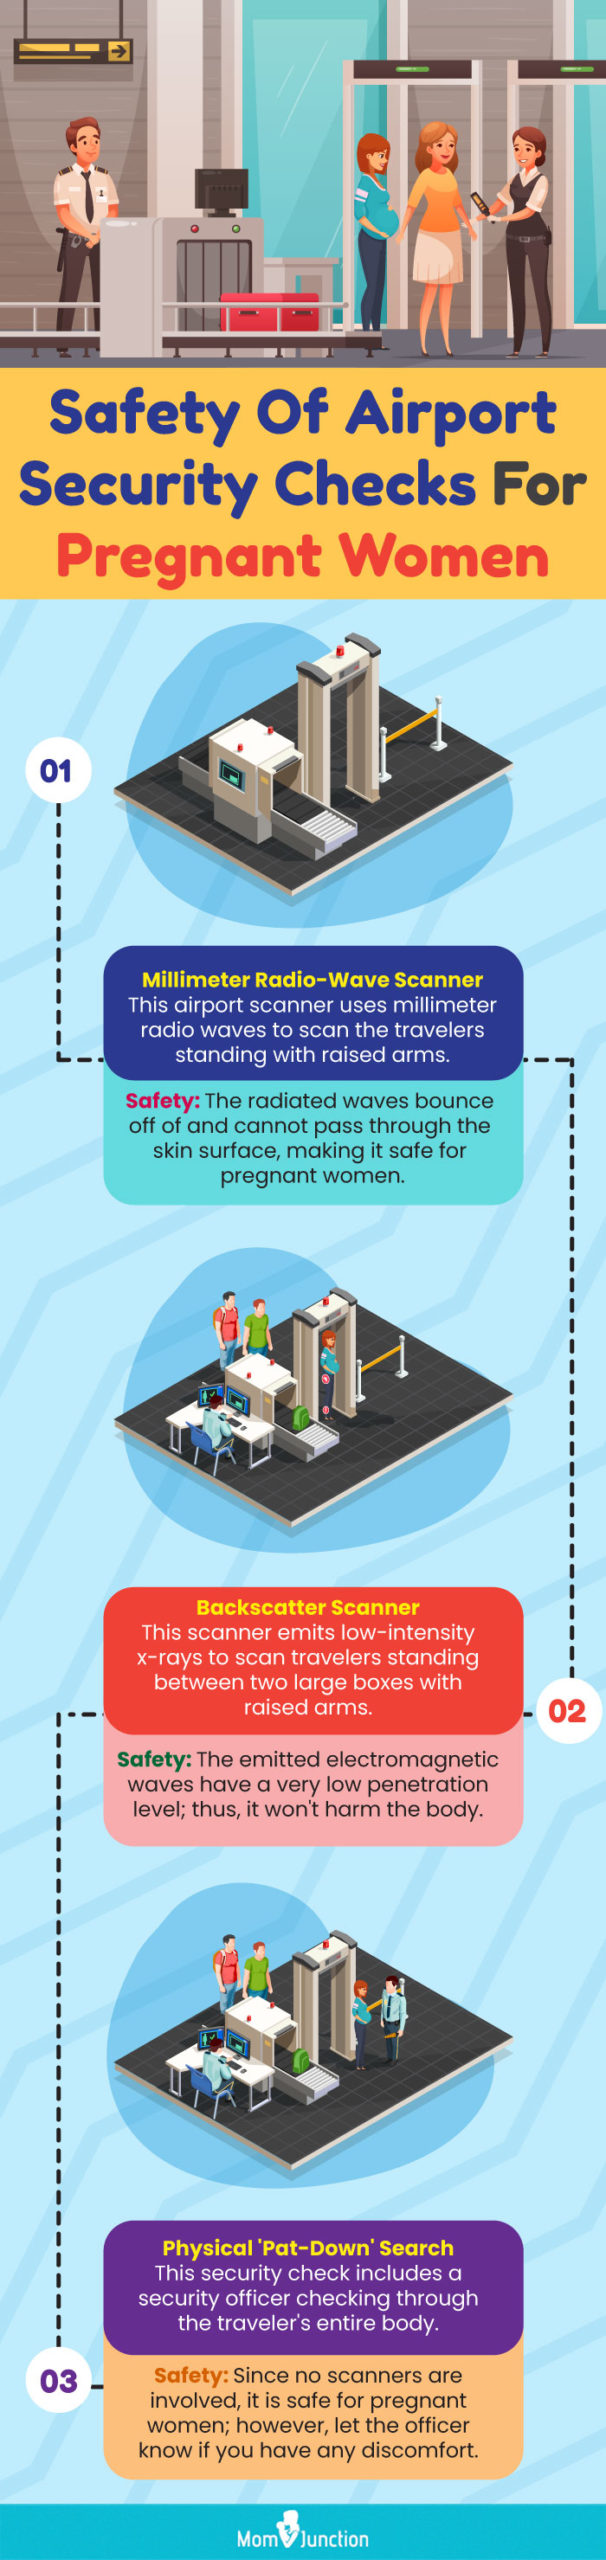 safety of airport security checks for pregnant (infographic)